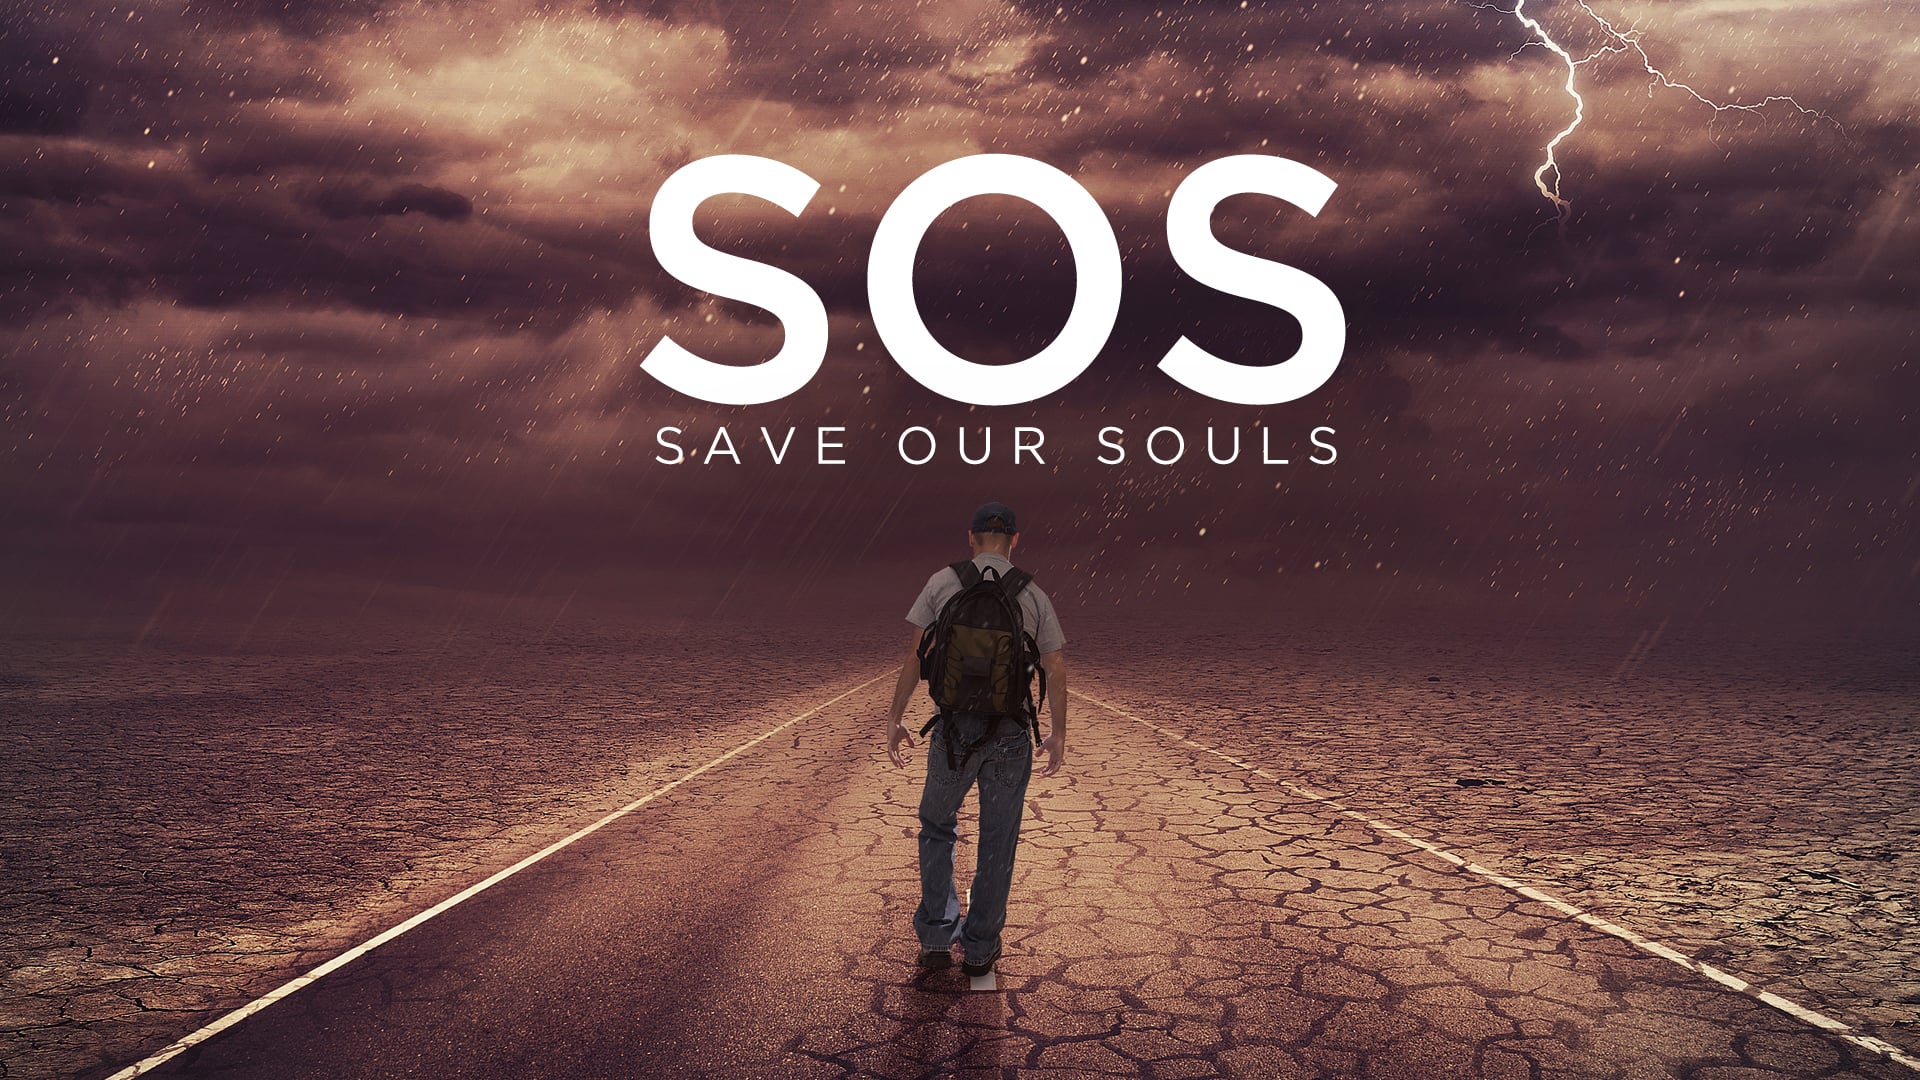 Save Our Souls - Part 1